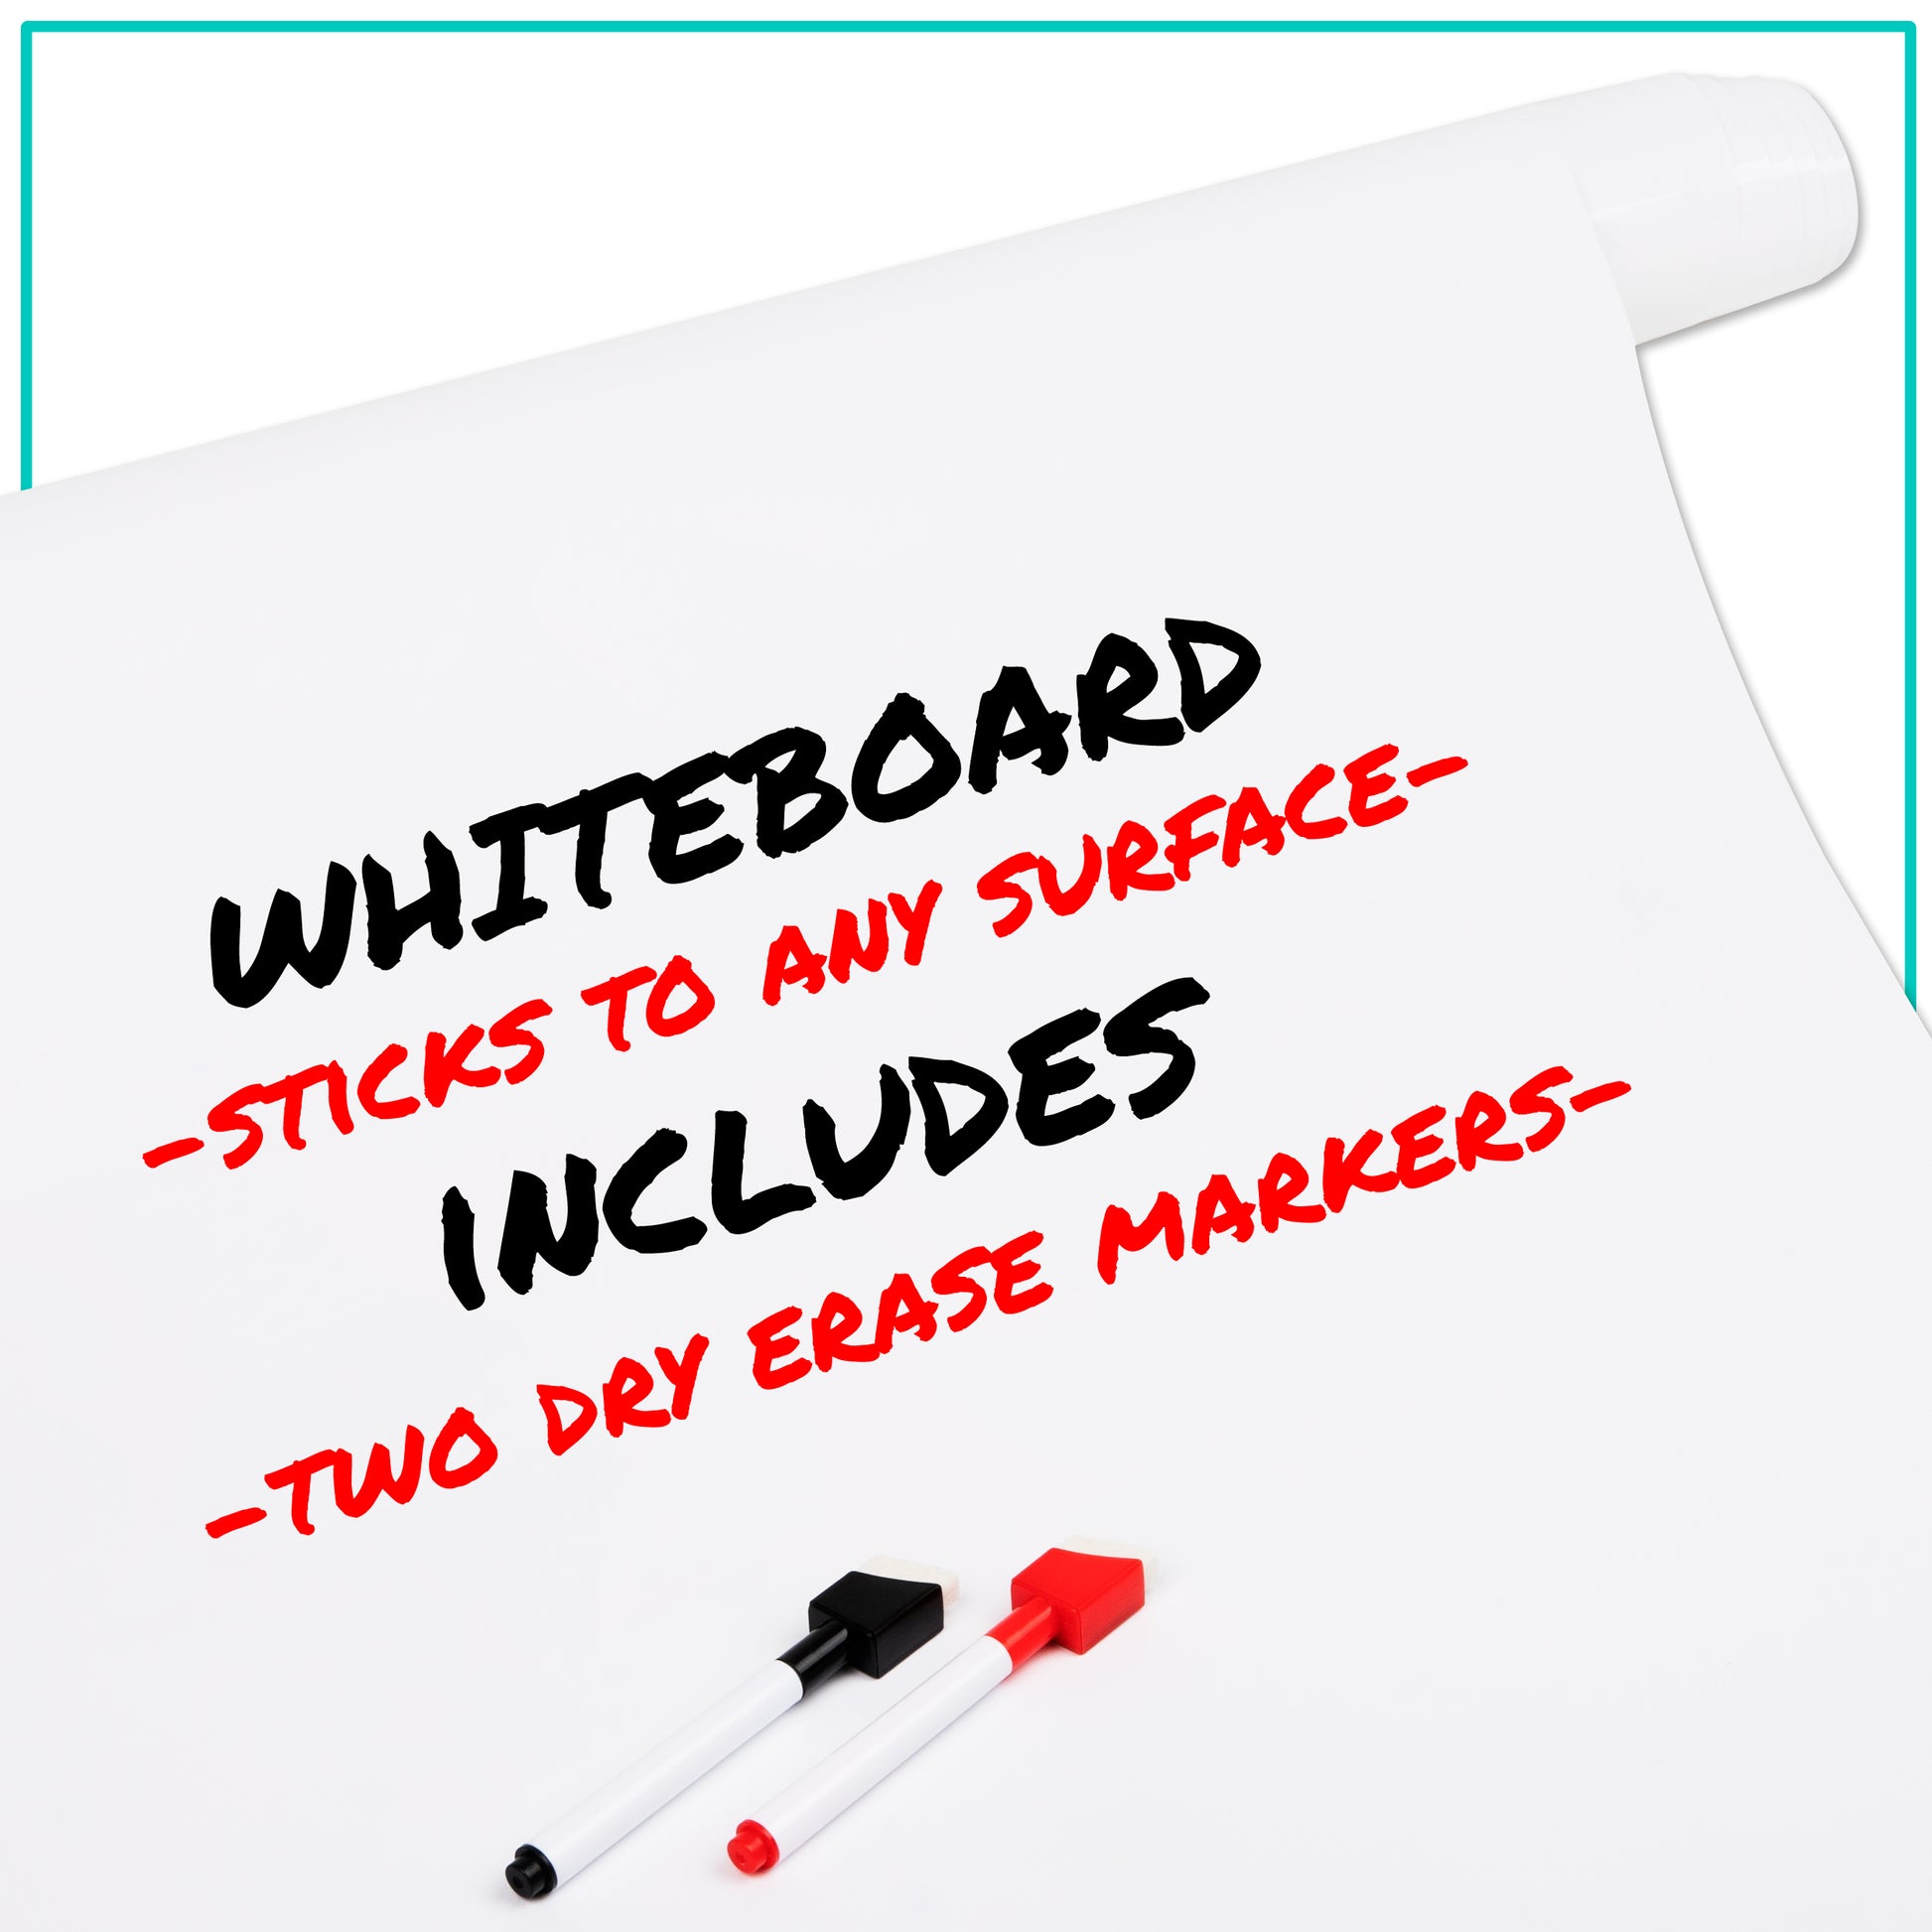 Mind Reader 9-to-5 Collection, Adhesive Dry Erase Whiteboard Roll with 2 Dry Erase Markers, 24 inches wide x 10 feet long, White